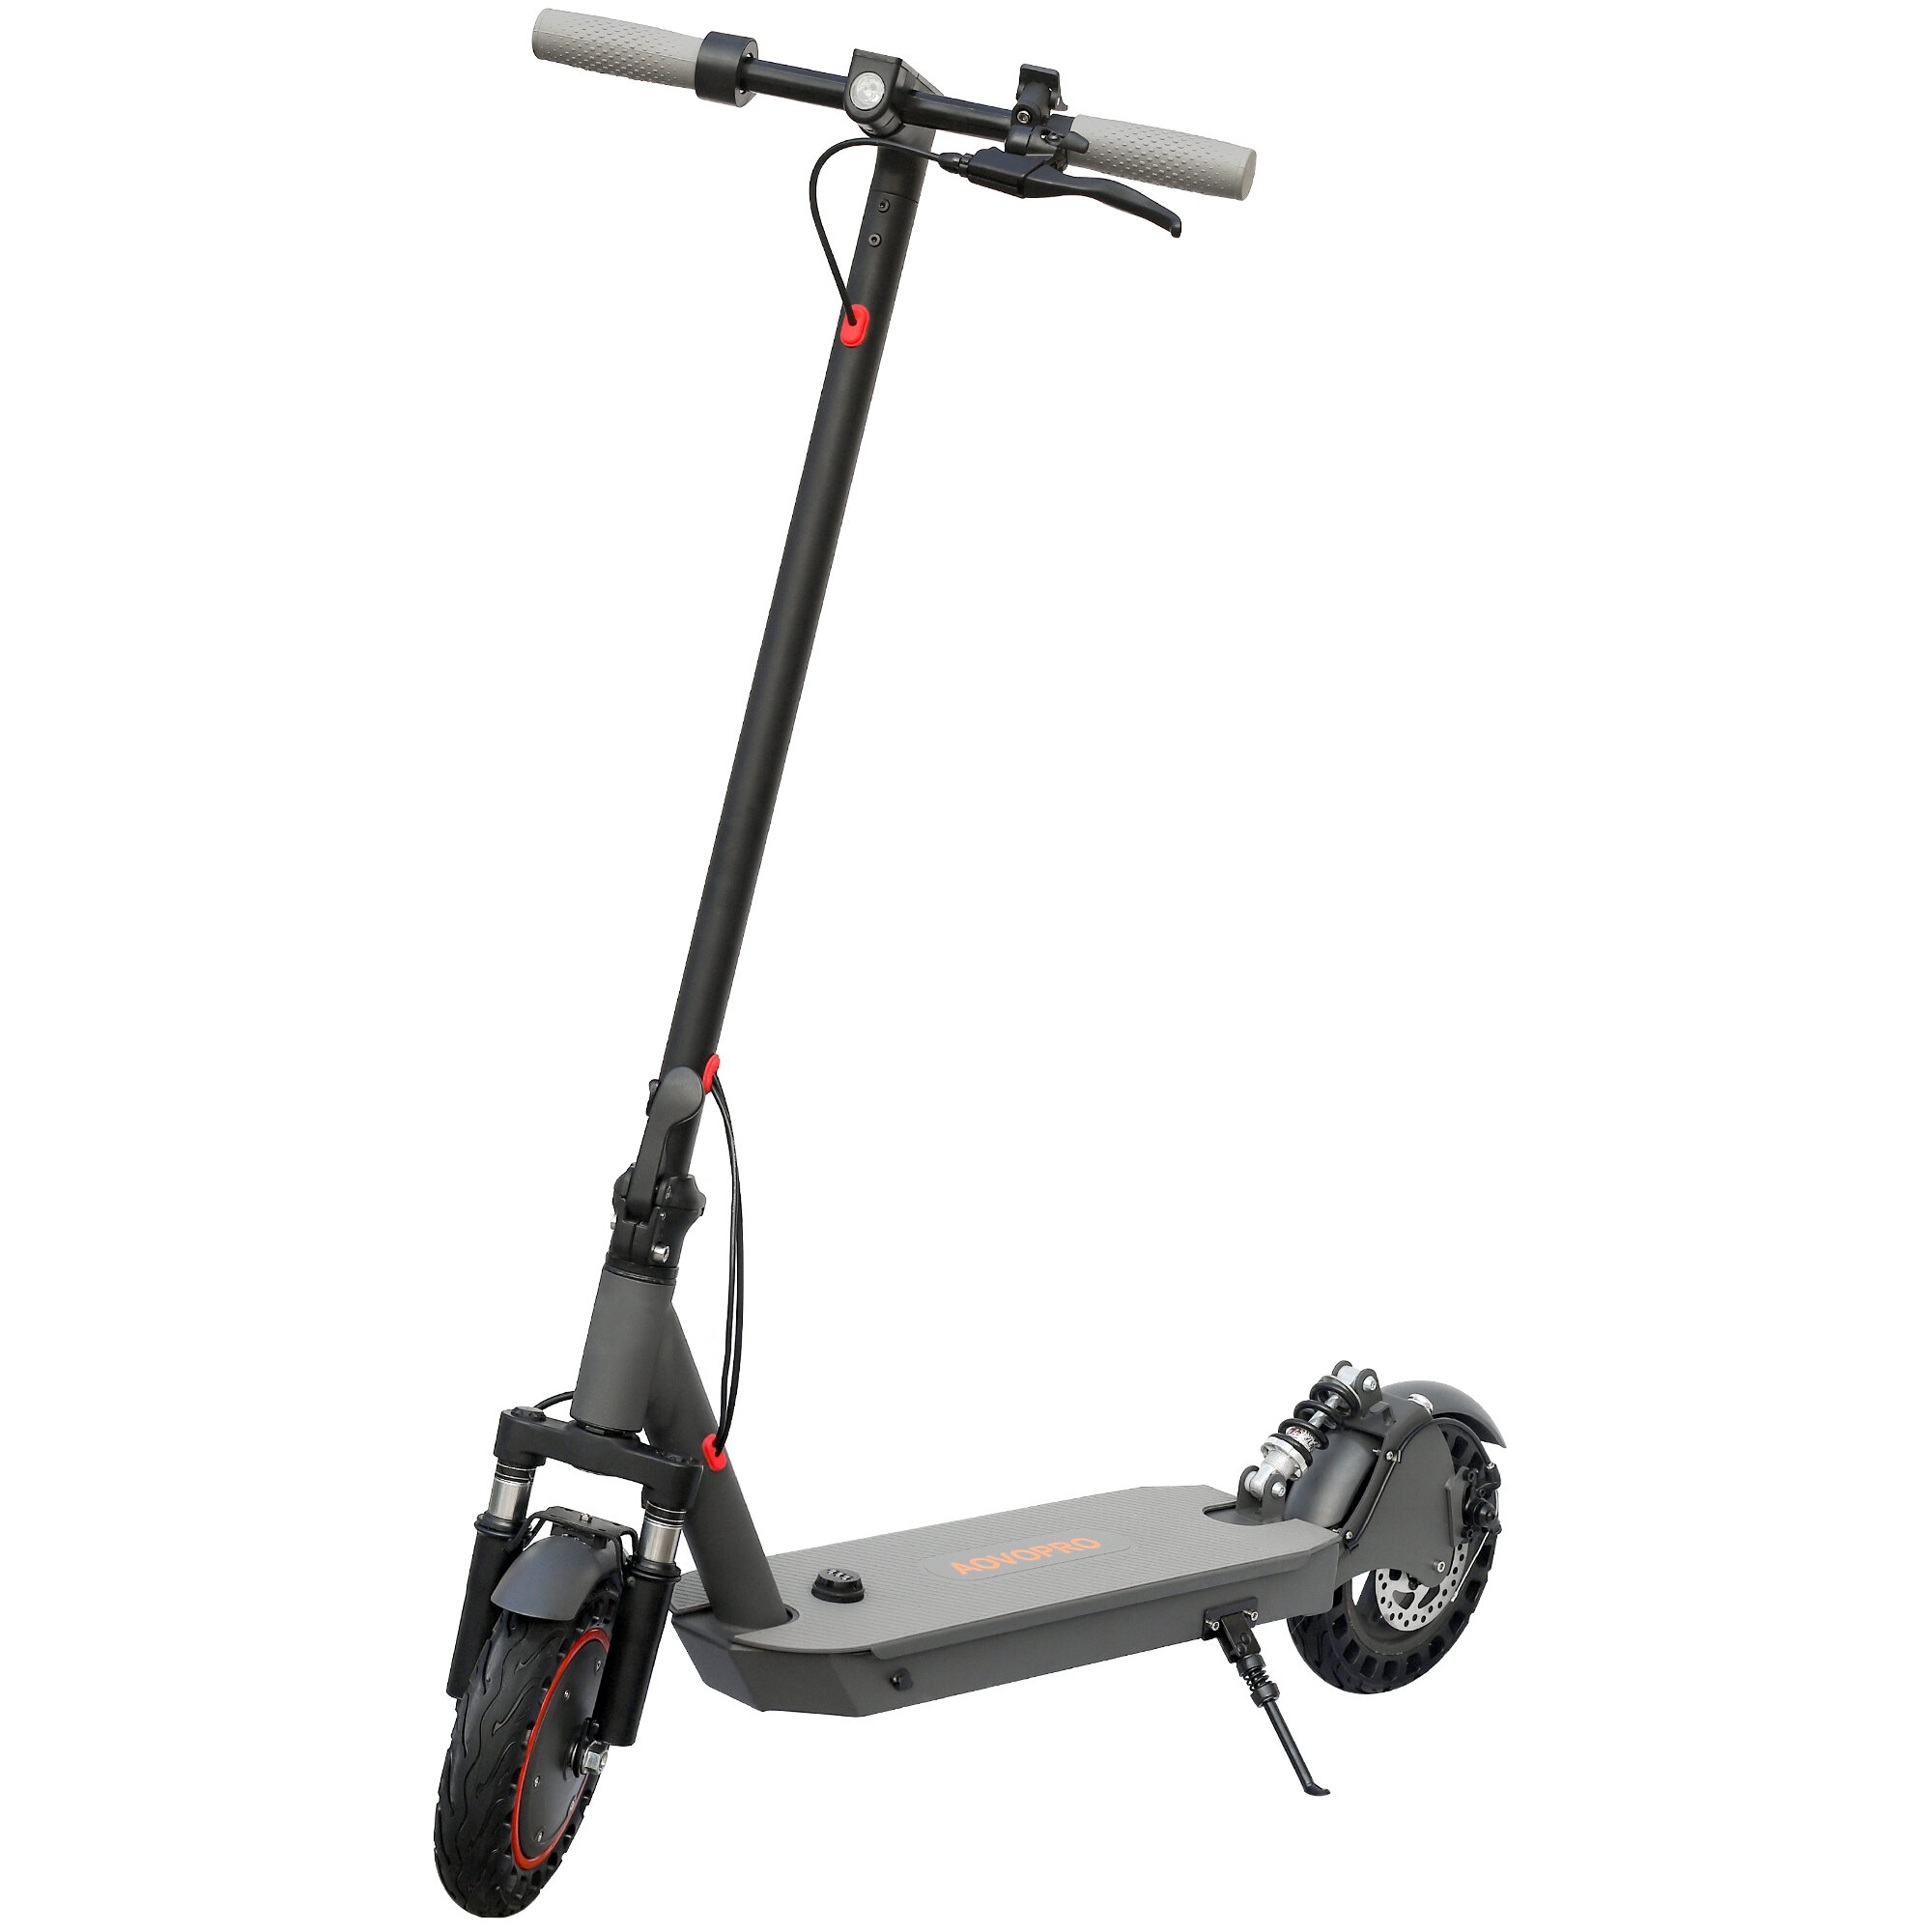 best price,aovopro,esmax,36v,14.5ah,500w,10in,electric,scooter,eu,coupon,price,discount